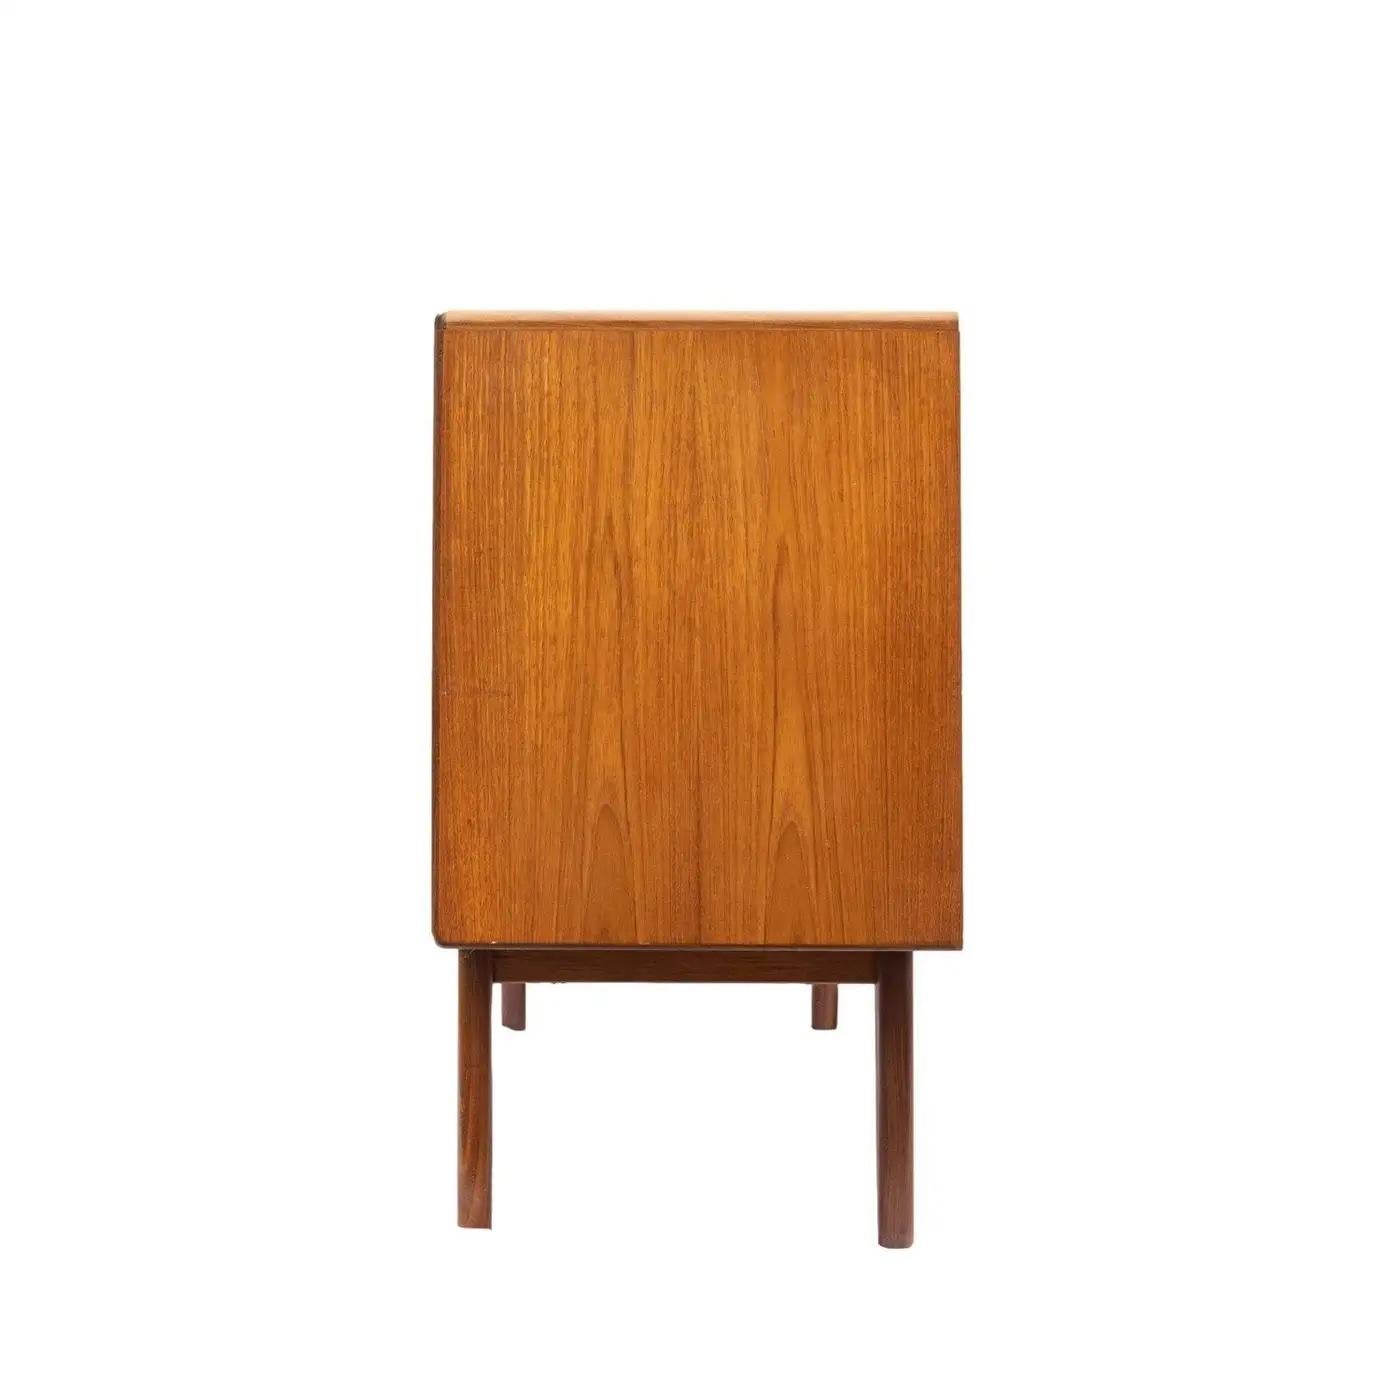 Mid-20th Century Mid-Century Teak Fresco Sideboard by v. Wilkins for G Plan, English, Ca. 1960 For Sale